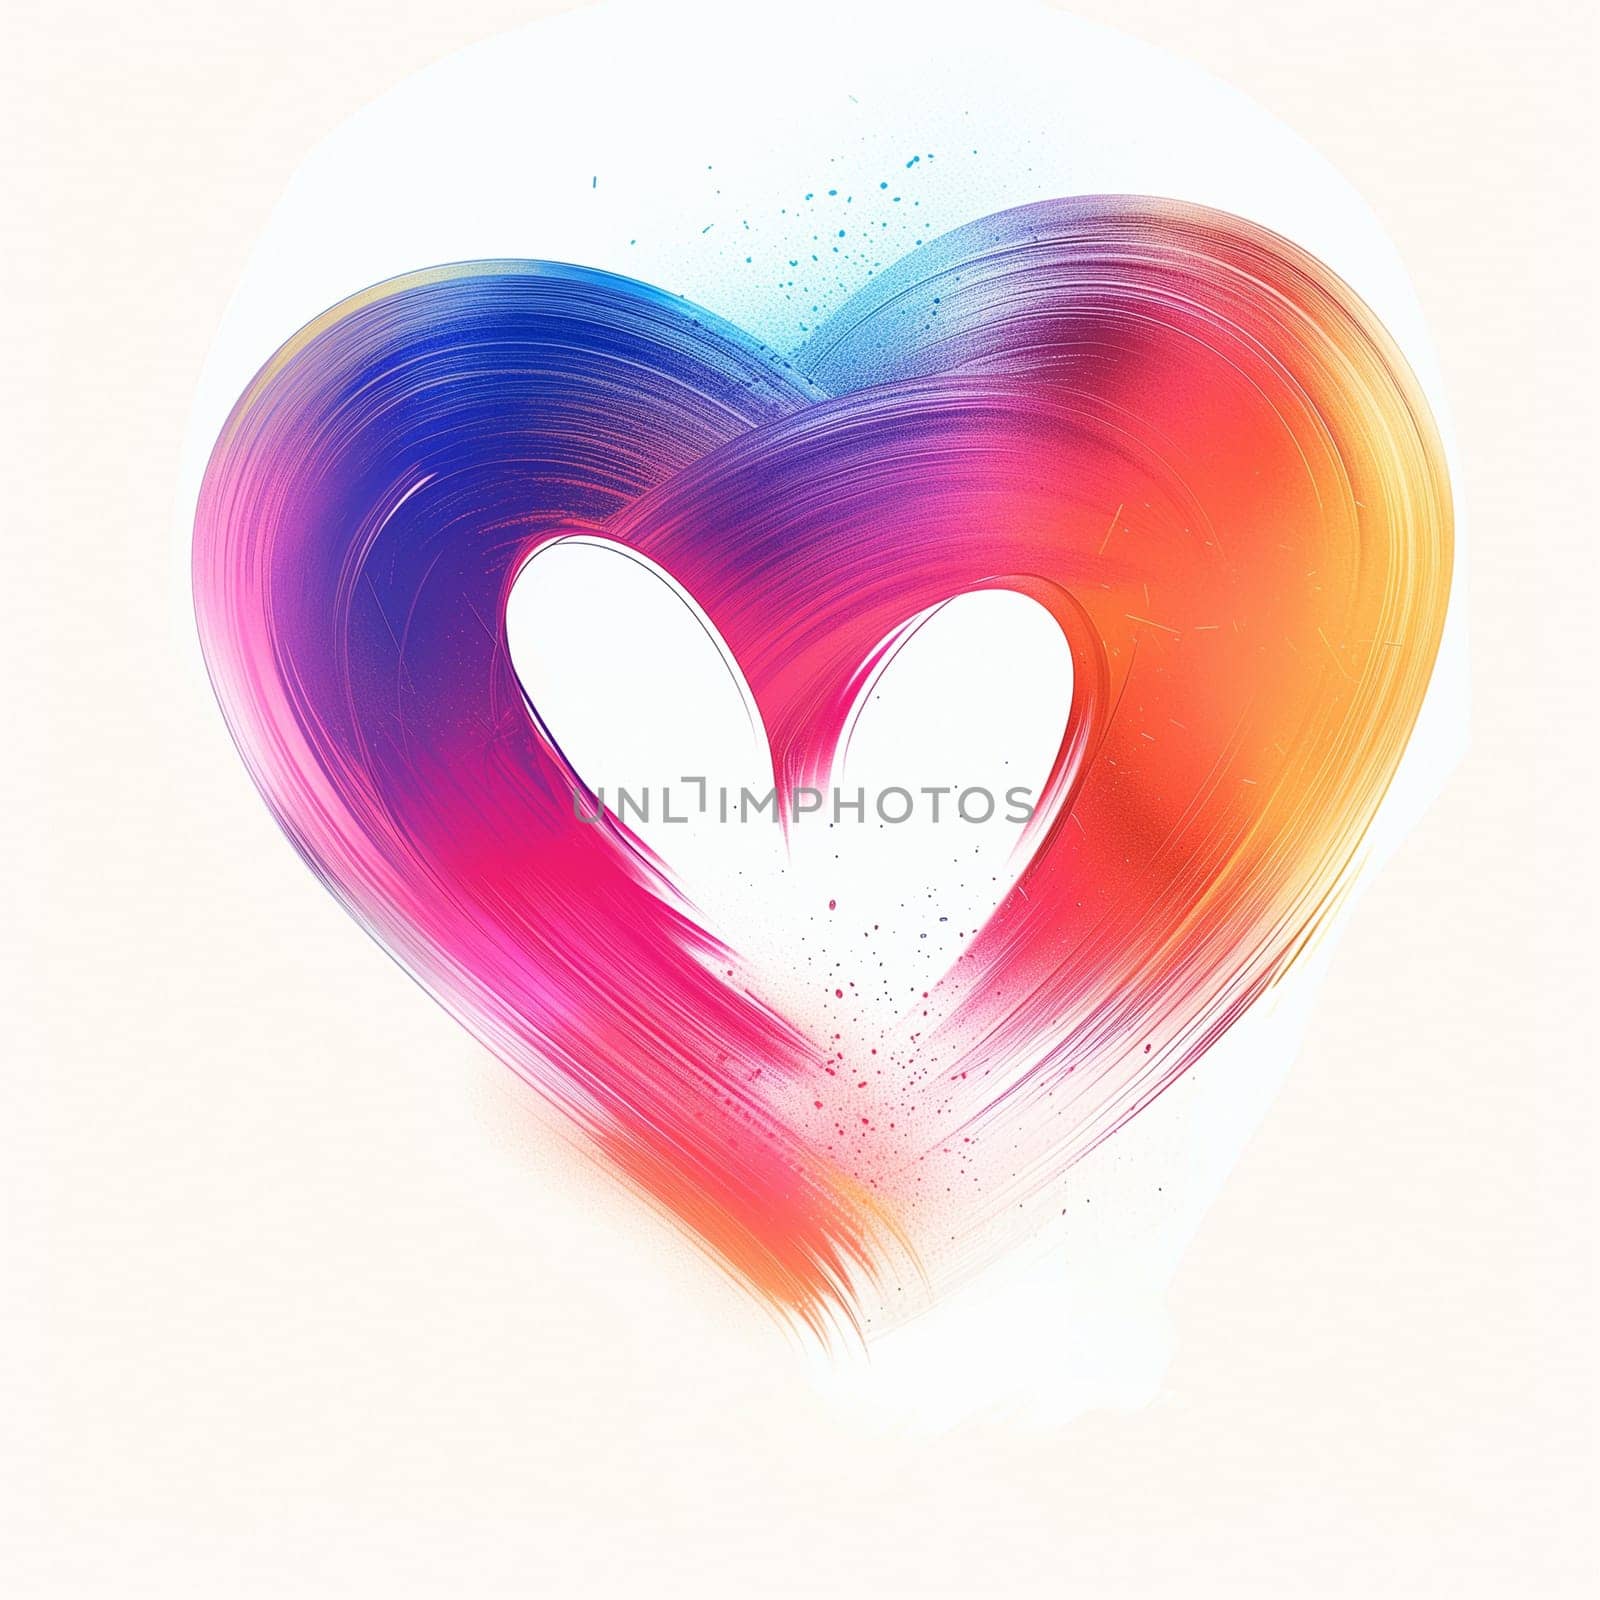 Abstract gradient heart on a white background by NeuroSky